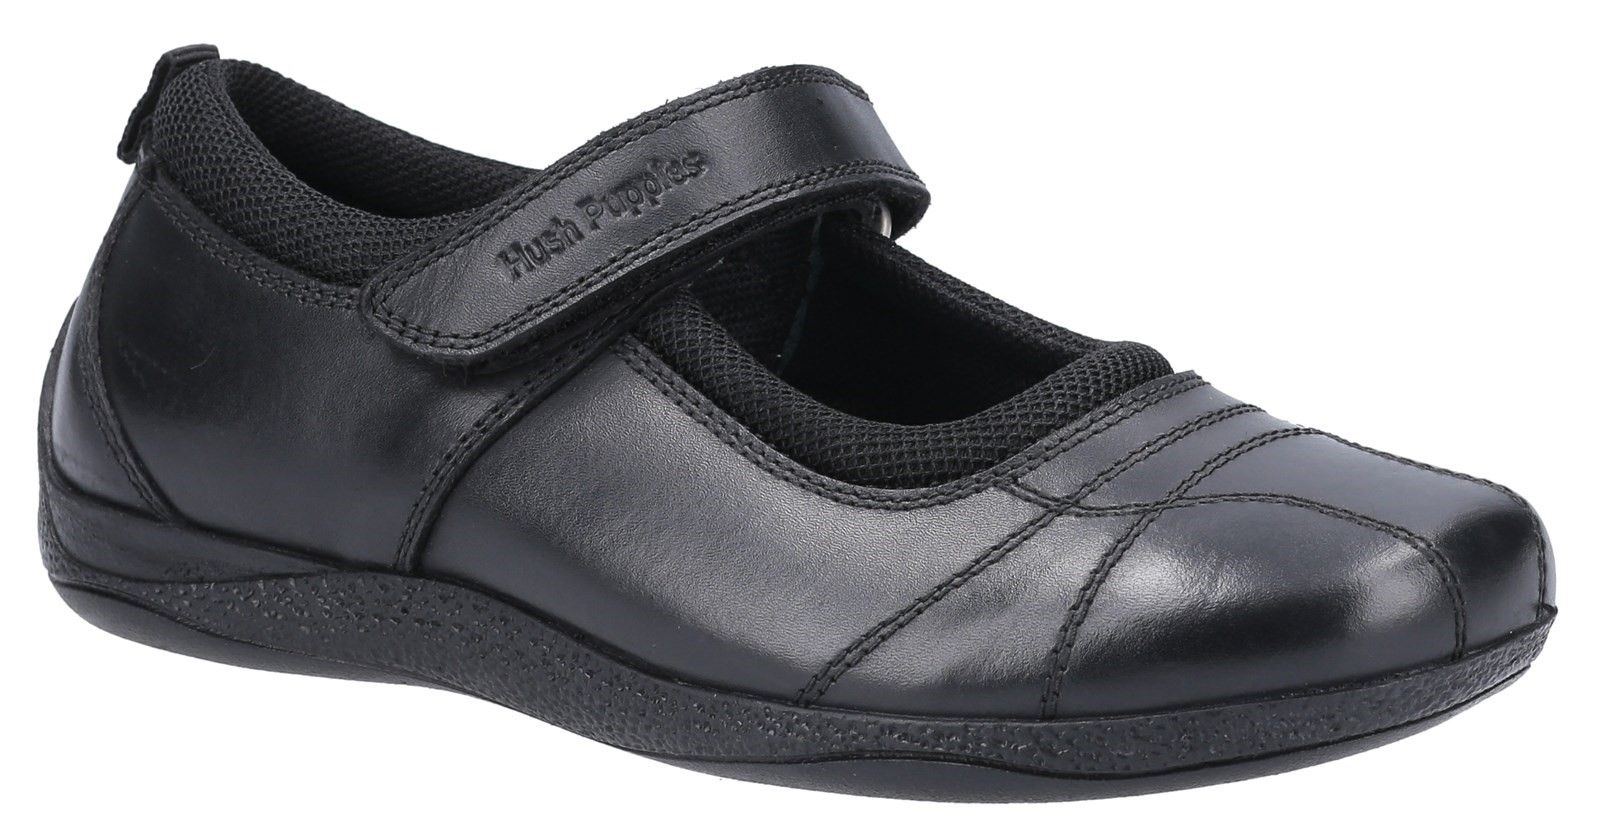 Clara is a single fit classic Mary jane style with a leather upper and touch-fastening strap for ease and adjustable fit. It features a padded topline/collar and a memory foam sock for all day comfort. It also has a Micro-Fresh sock and lining.Leather Upper. 
Memory Foam Insole. 
Micro-Fresh Lining.